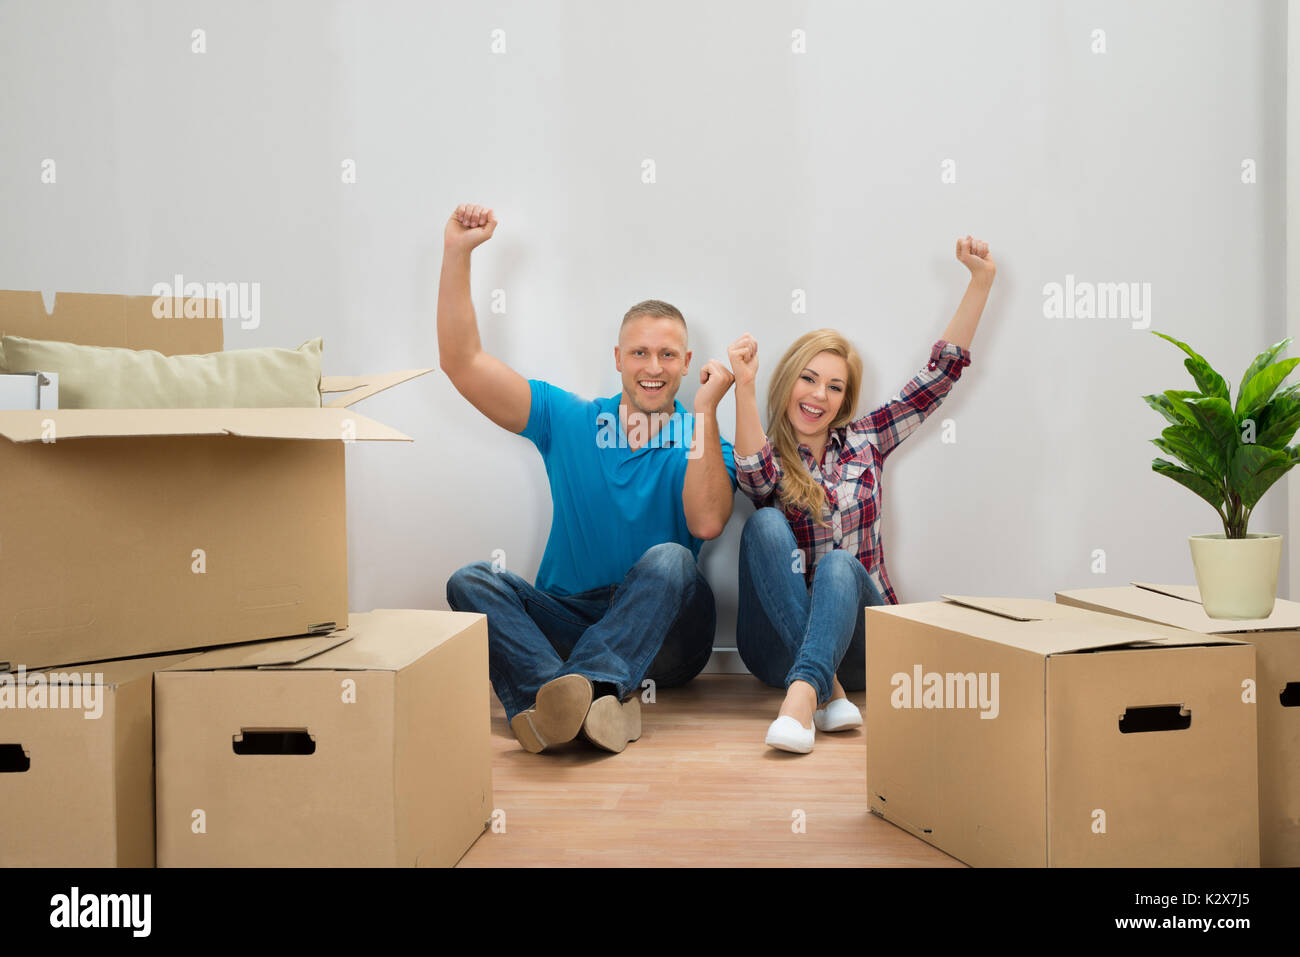 Portrait Of Excited Young Couple With Cardboard Boxes In New Home Stock Photo